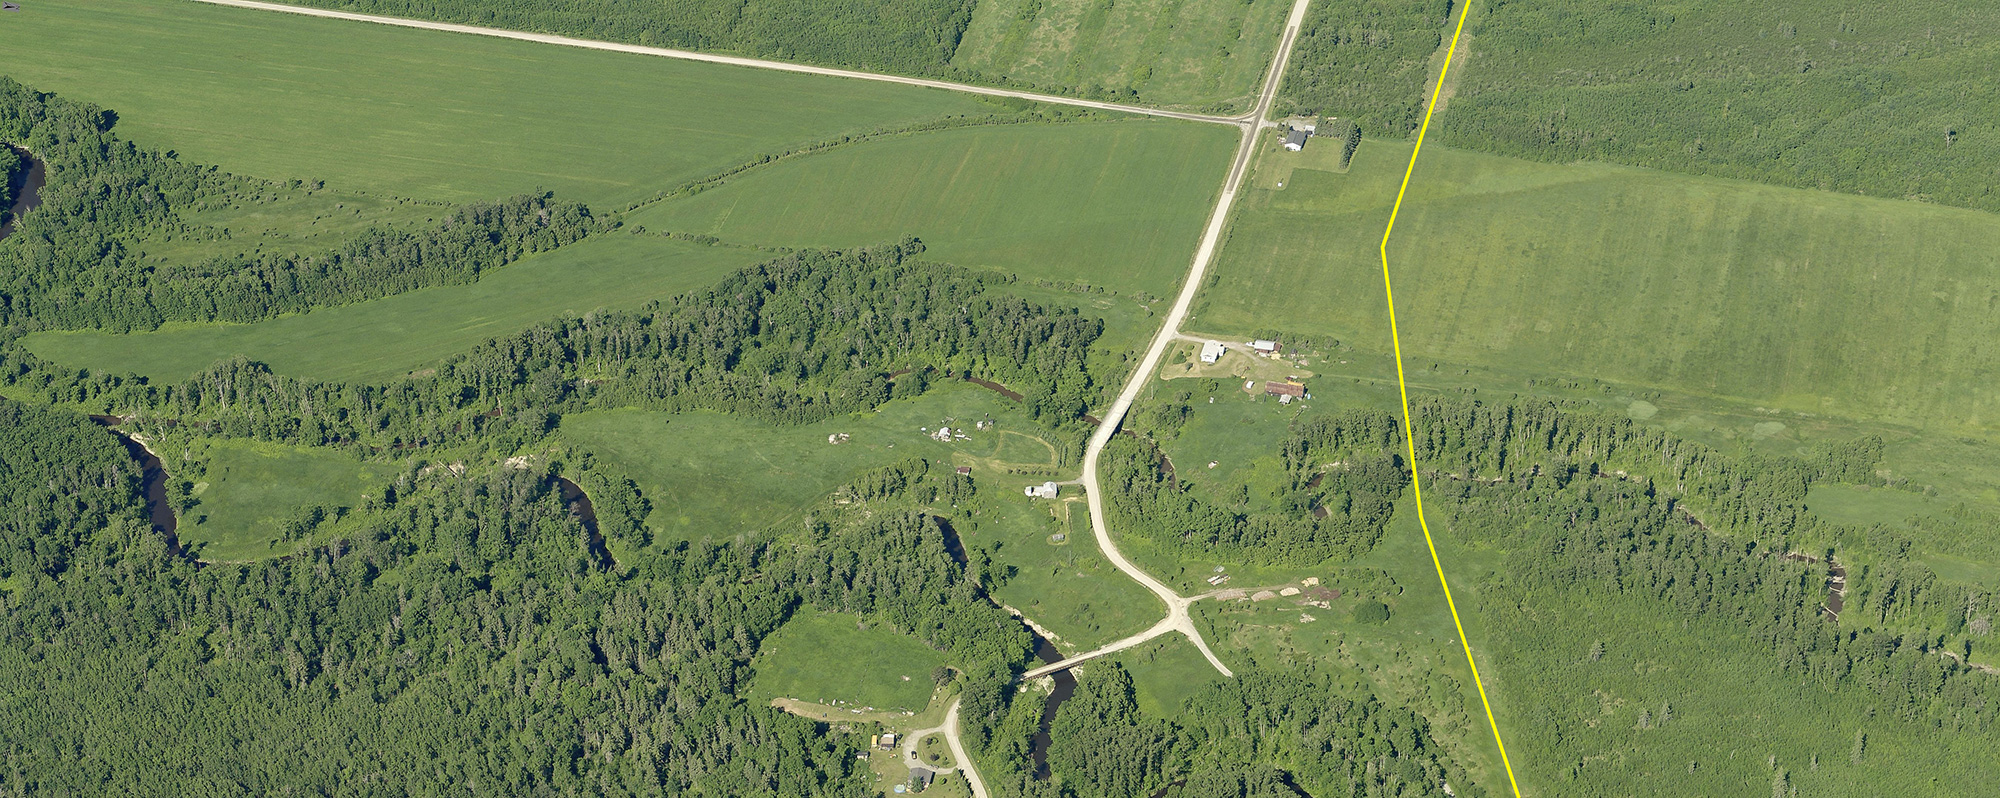 EagleView high-resolution aerial imagery integrates with GIS software to provide pipeline and gas professionals with accurate information regarding high consequence areas.